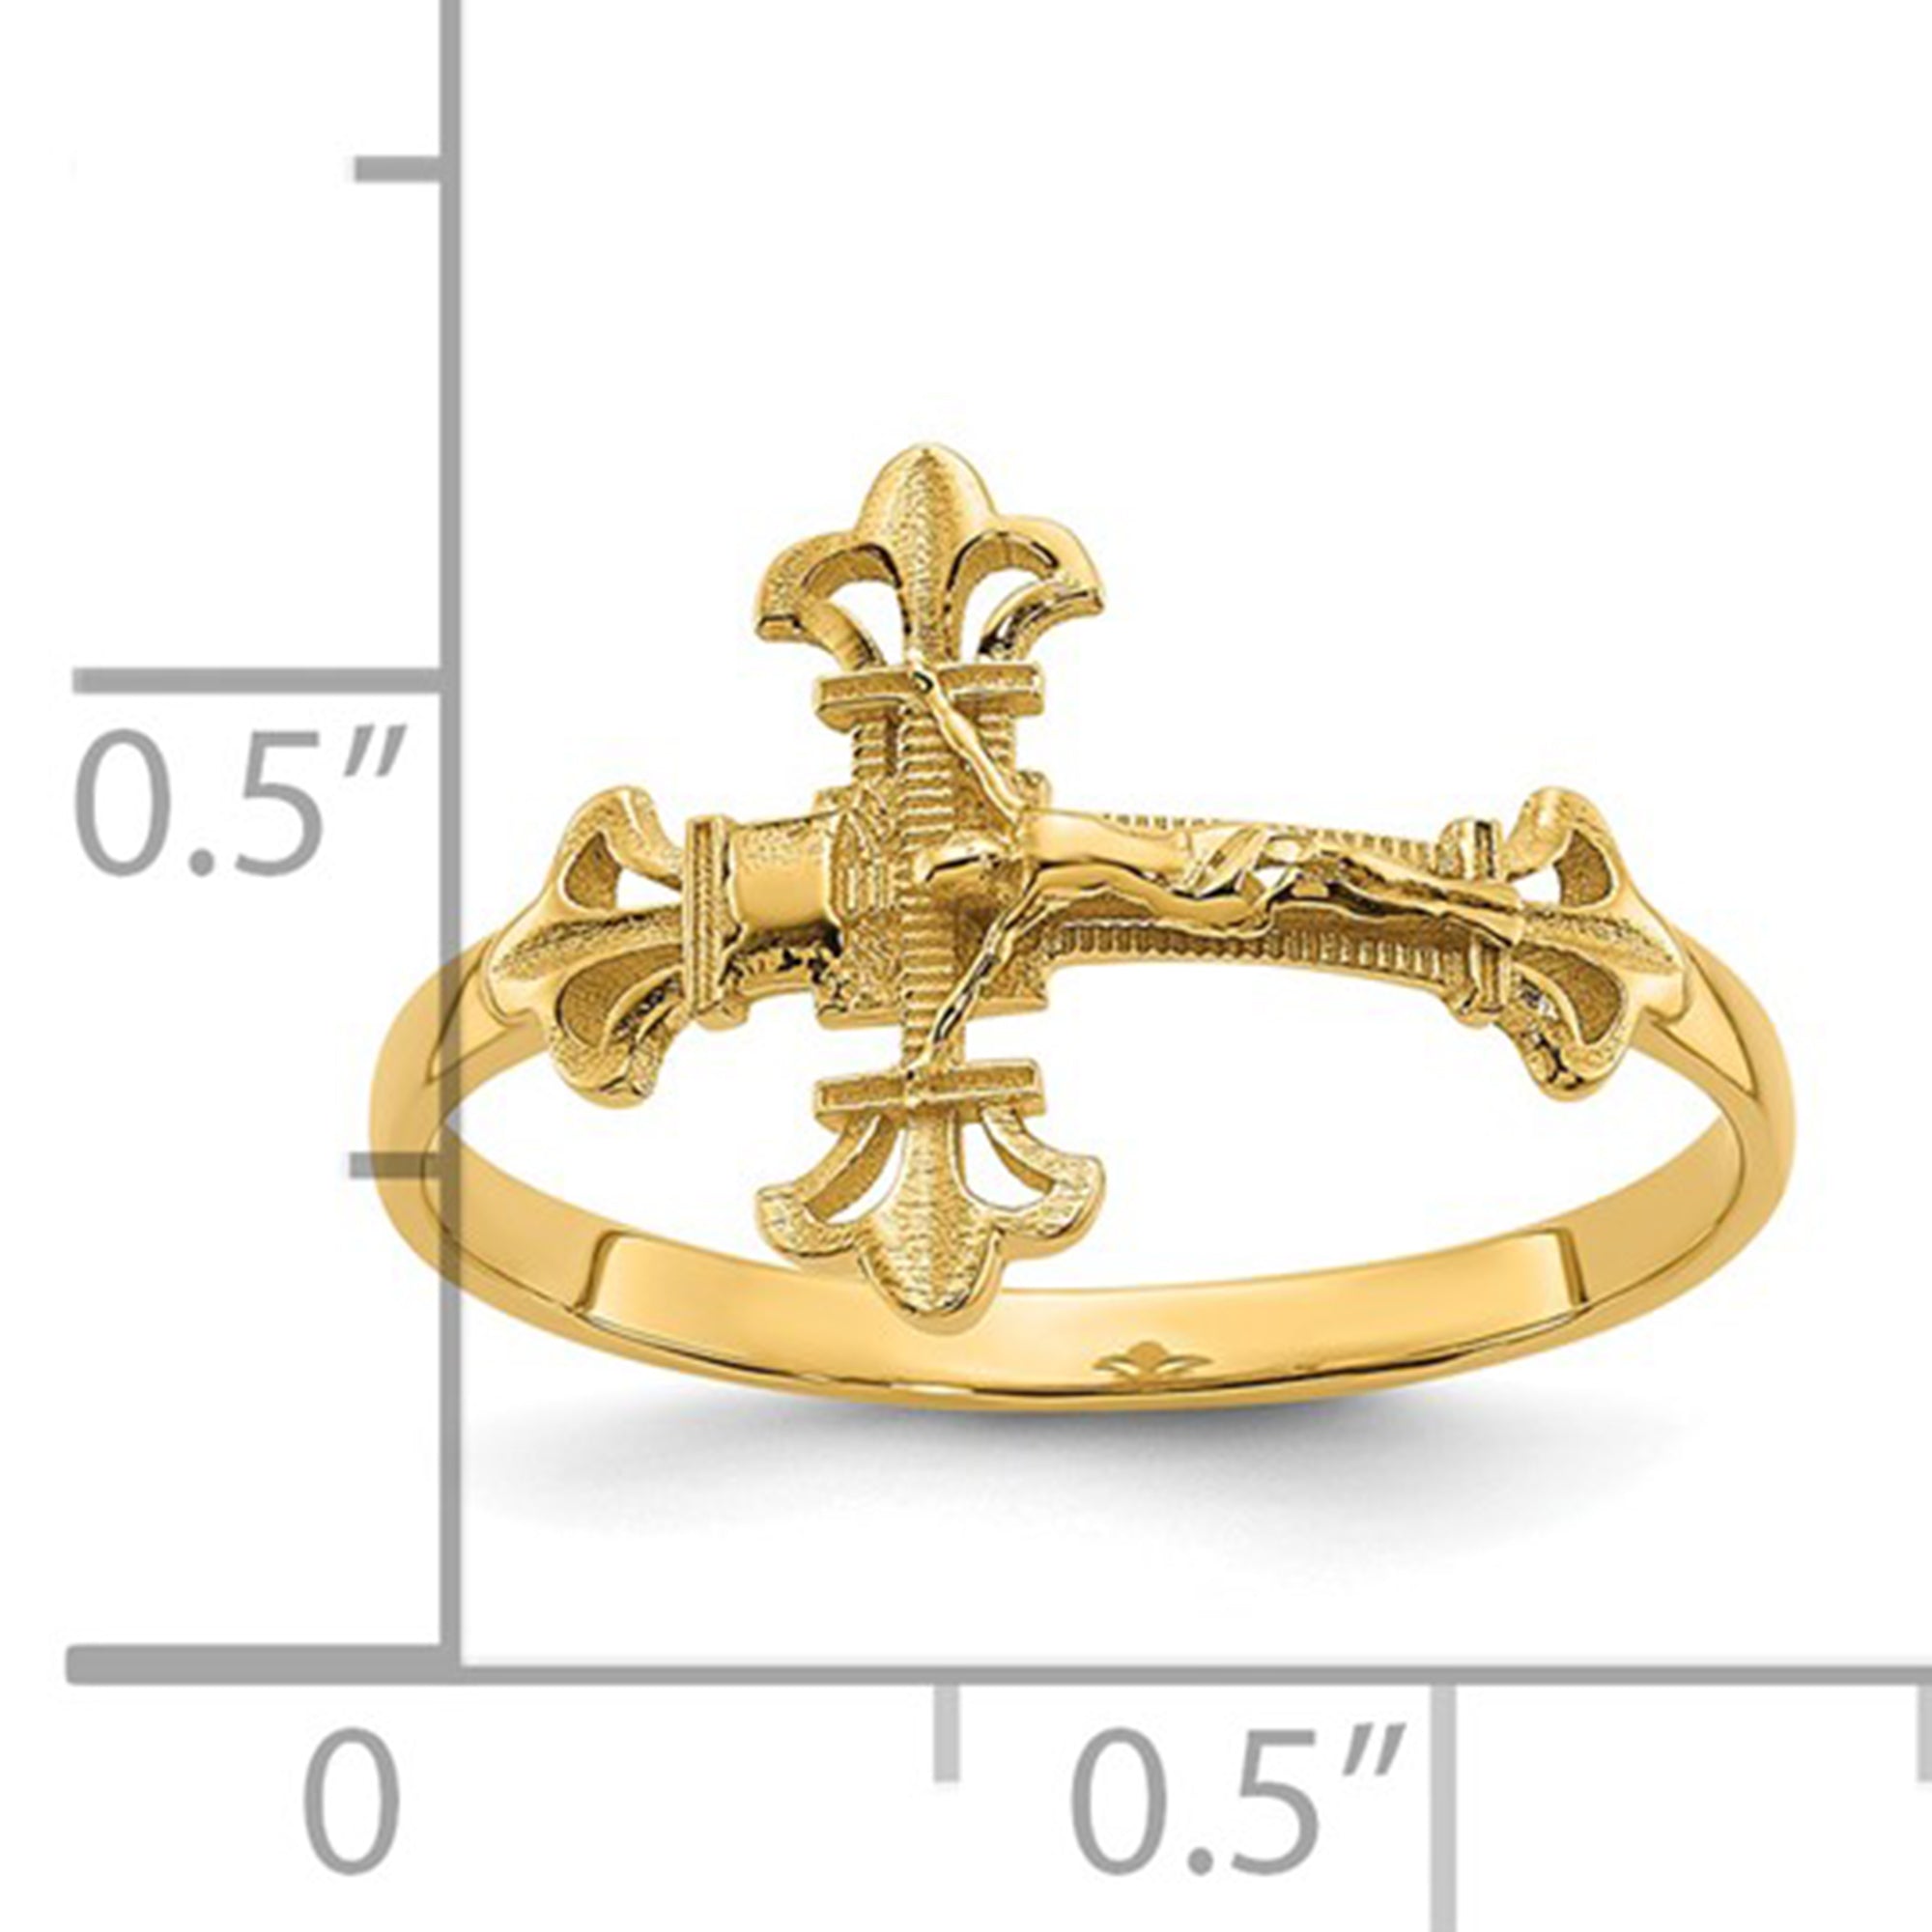 14K Real Yellow Gold Diamond Cut Crucifix Ring, Size 7 fine designer jewelry for men and women